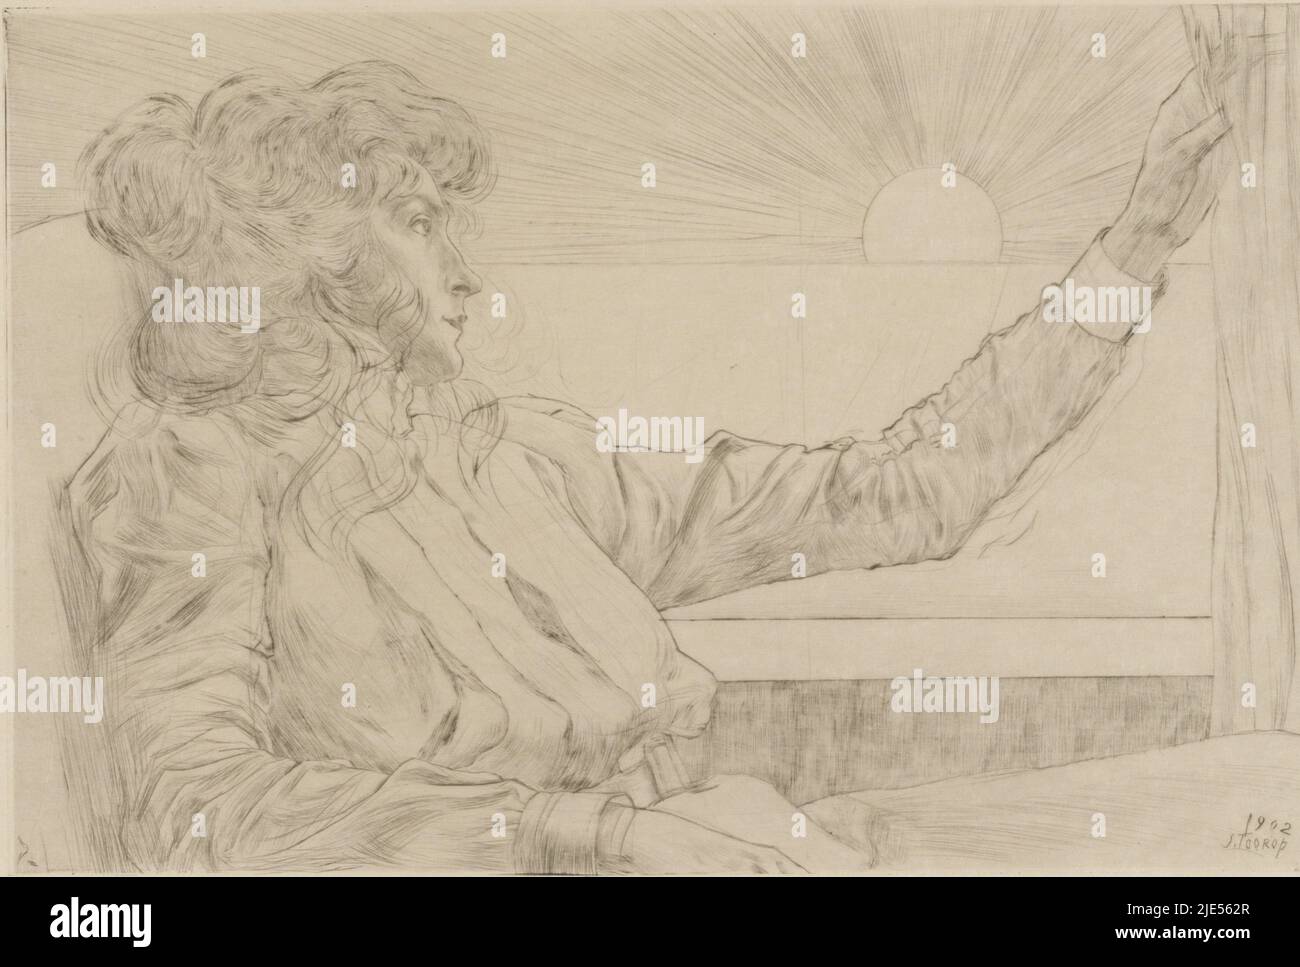 Woman sitting in front of a window Woman looking at the sun / Awakening / Sunset / L'aurore (original title), print maker: Jan Toorop, (signed by artist), 1899, Japanese paper (handmade paper), drypoint, h 236 mm × w 356 mm Stock Photo